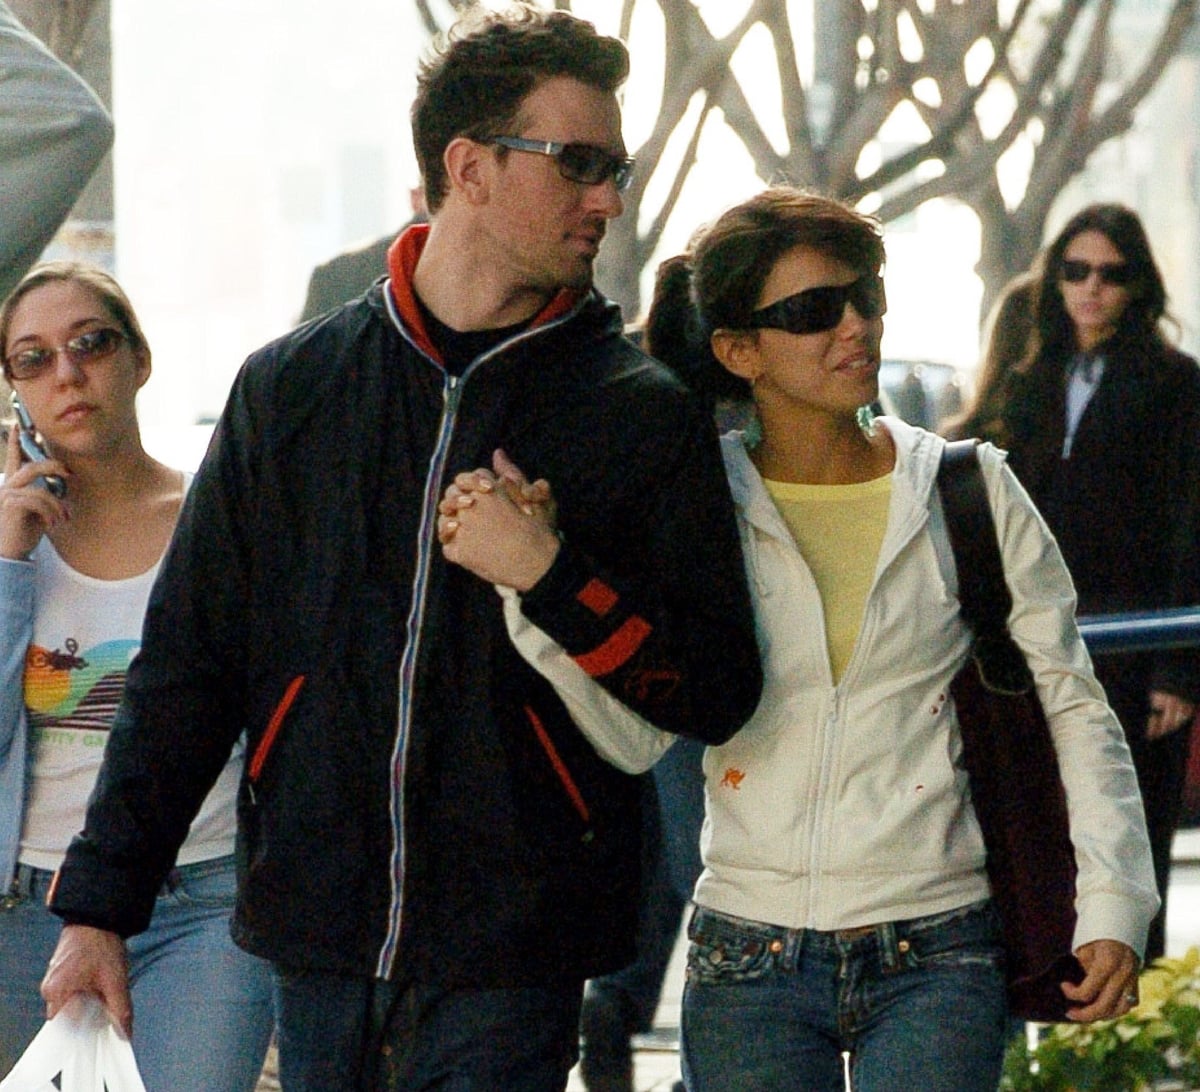 JC Chasez and his girlfriend Eva Longoria on a date in Los Angeles